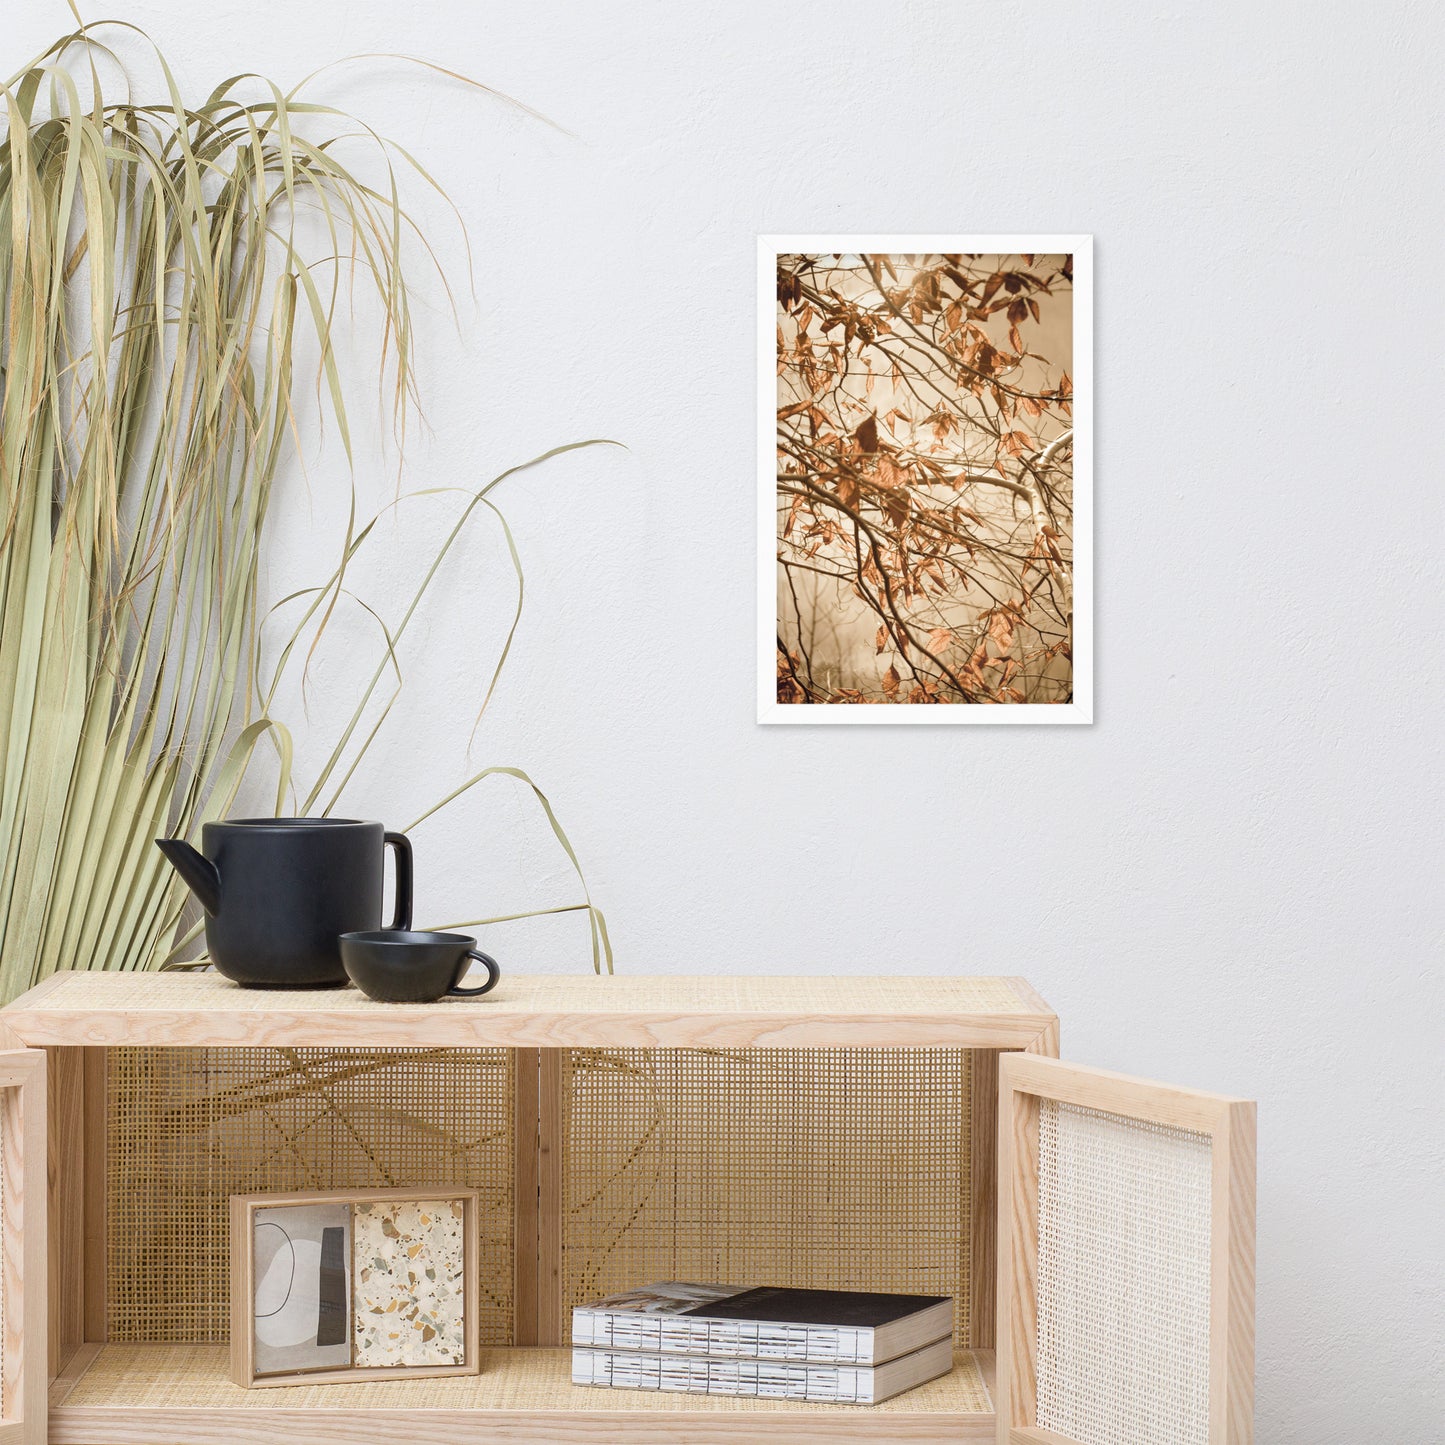 Hallway Wall Accessories: Aged Winter Leaves Botanical / Nature Photo Framed Wall Art Print - Artwork - Farmhouse Style Wall Decor